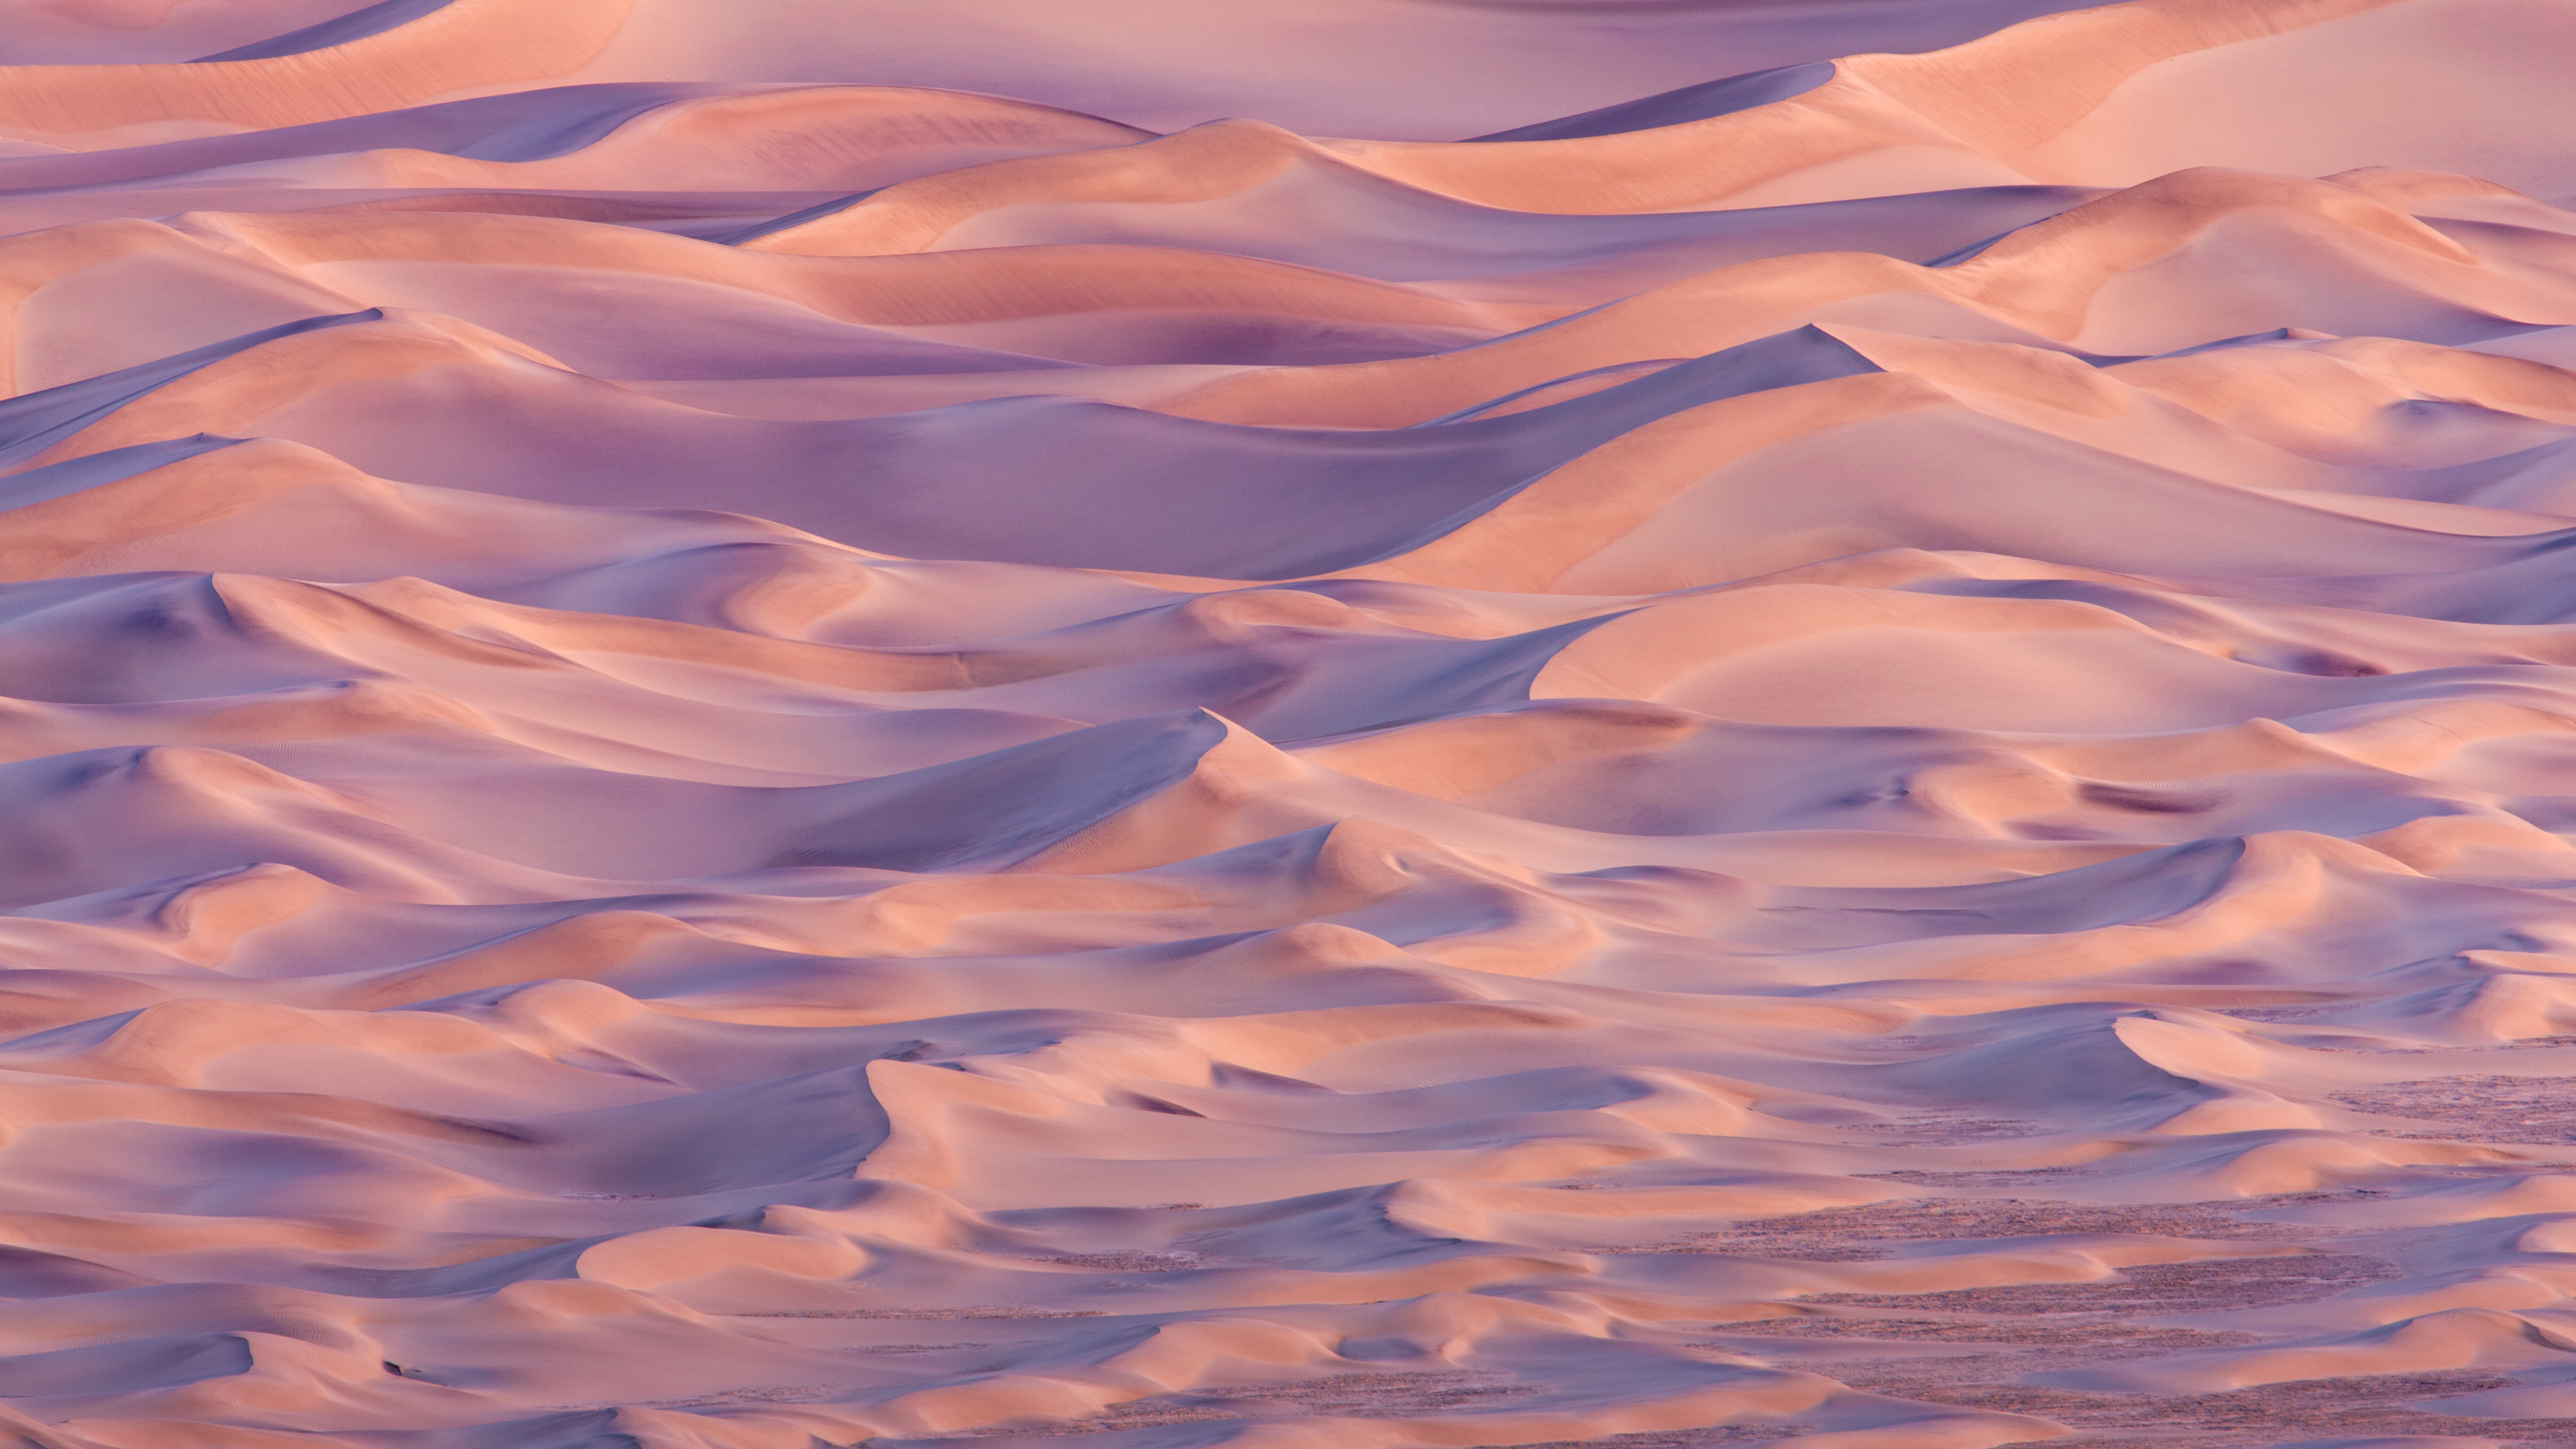 Apple Adds 8 Beautiful New Wallpapers to OS X Mavericks, Download Now